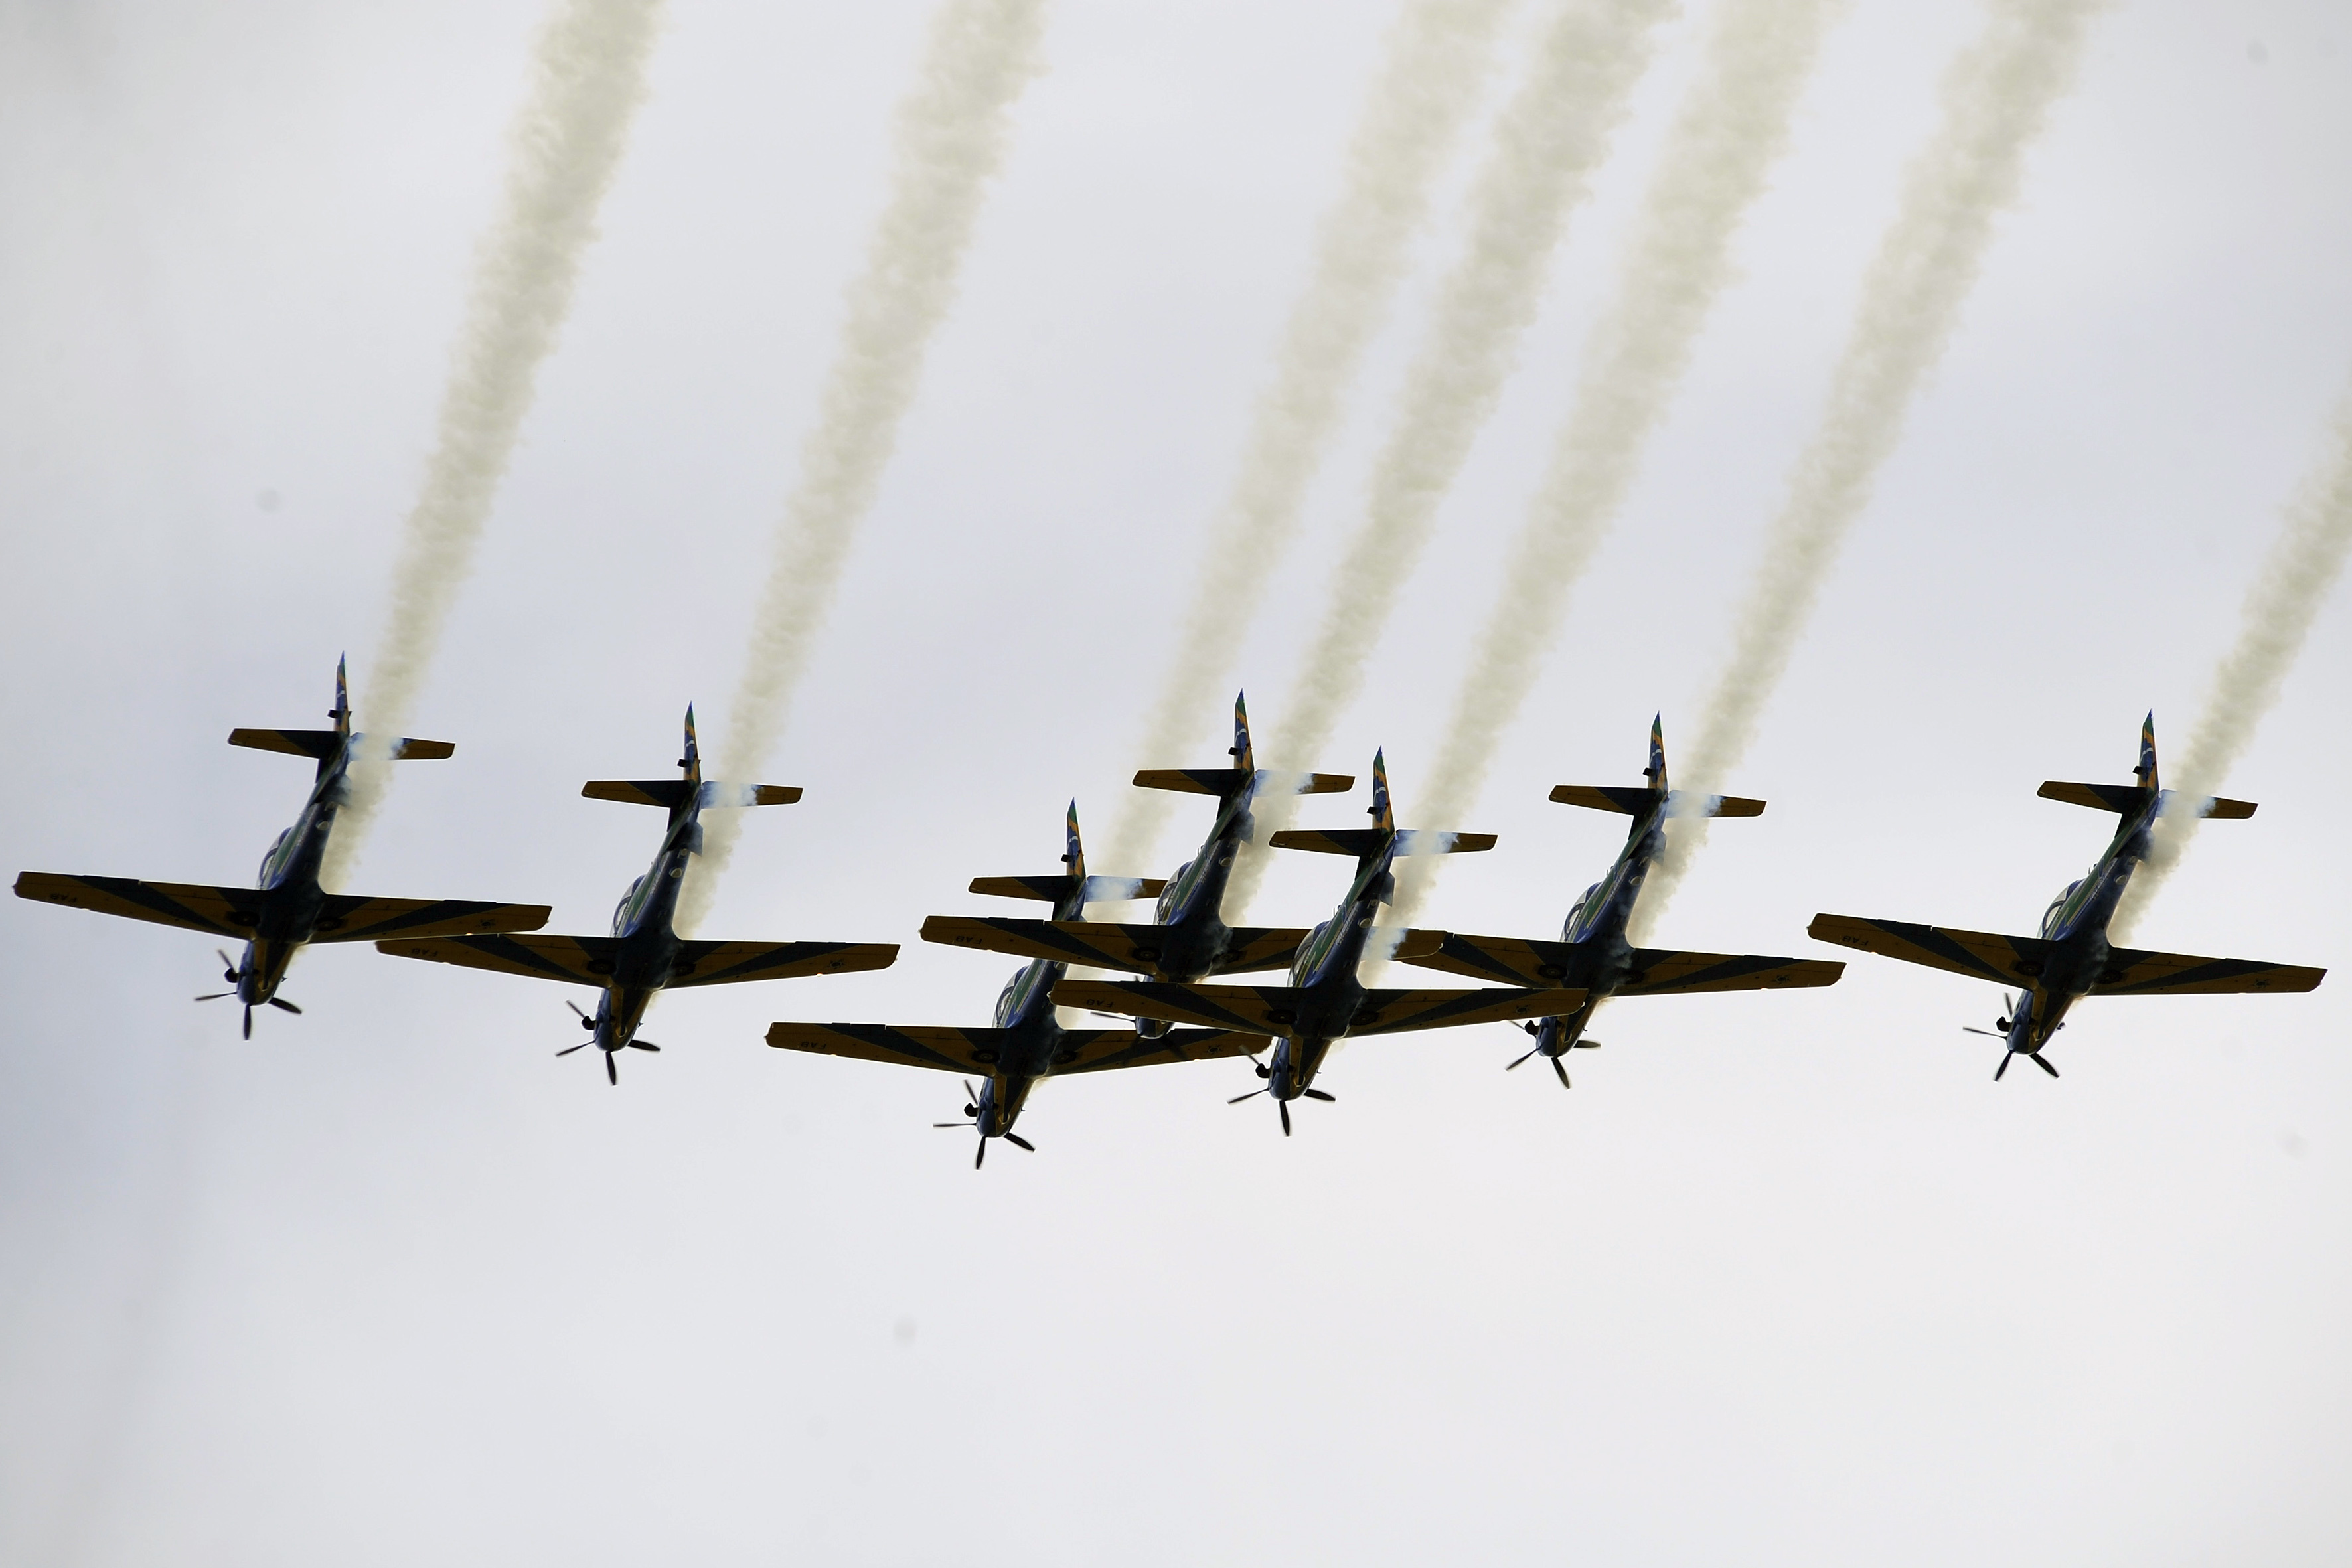 01 January 2019, Brazil, Brasilia: A squadron flies over the city as part of the inauguration of President designate Jair Messias Bolsonaro. 500,000 visitors were expected at the inauguration. More than 3000 policemen and soldiers are to provide security. Air defence missiles and fighter jets are also ready for action. Photo by: Alan Morici/picture-alliance/dpa/AP Images